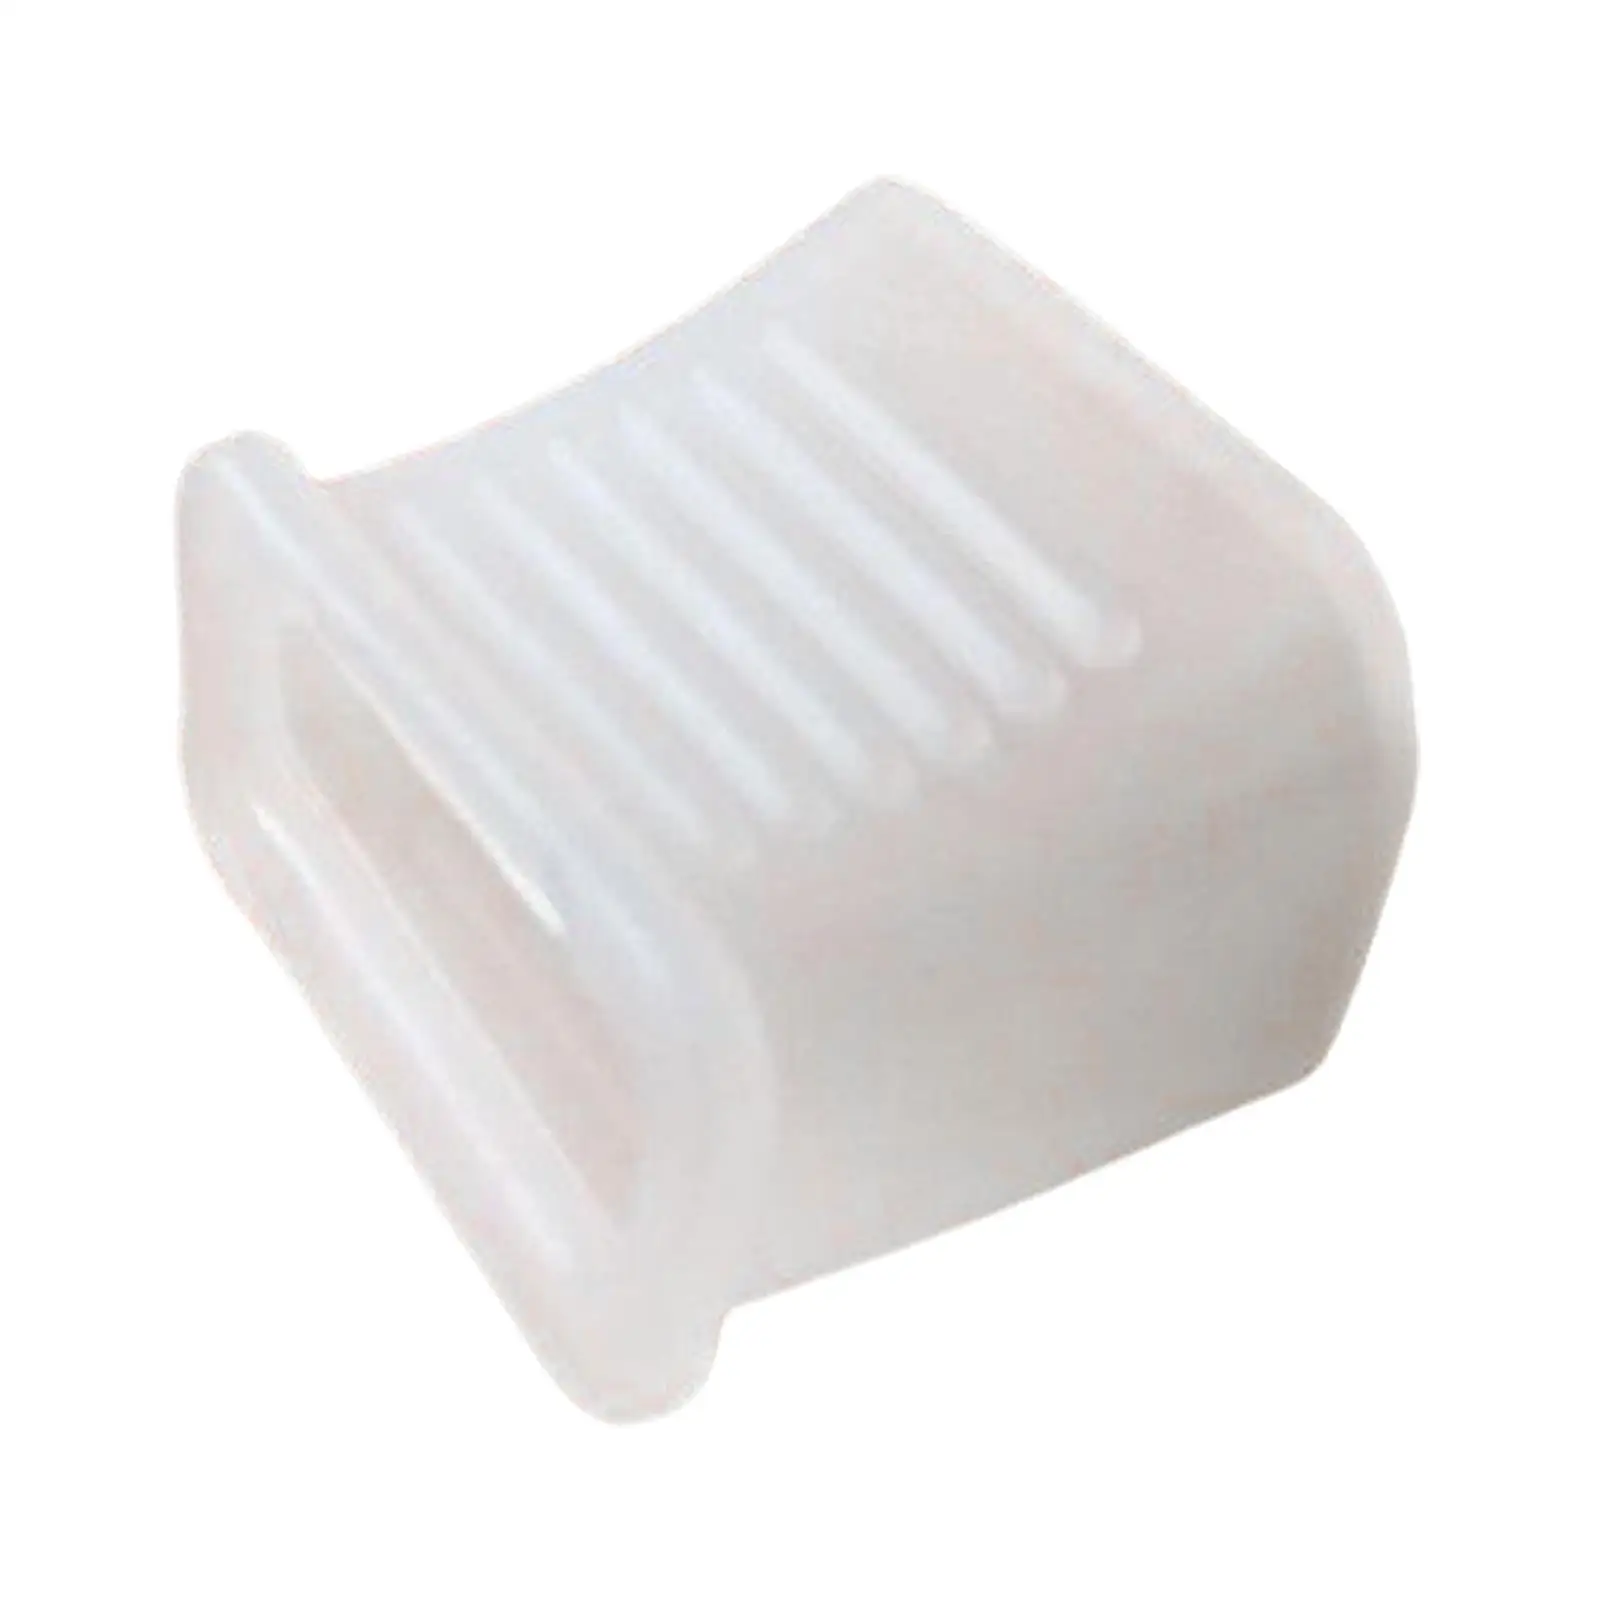 Histle Mouth Cover Protector White Mouth Piece PVC Whistle Mouth Protector for